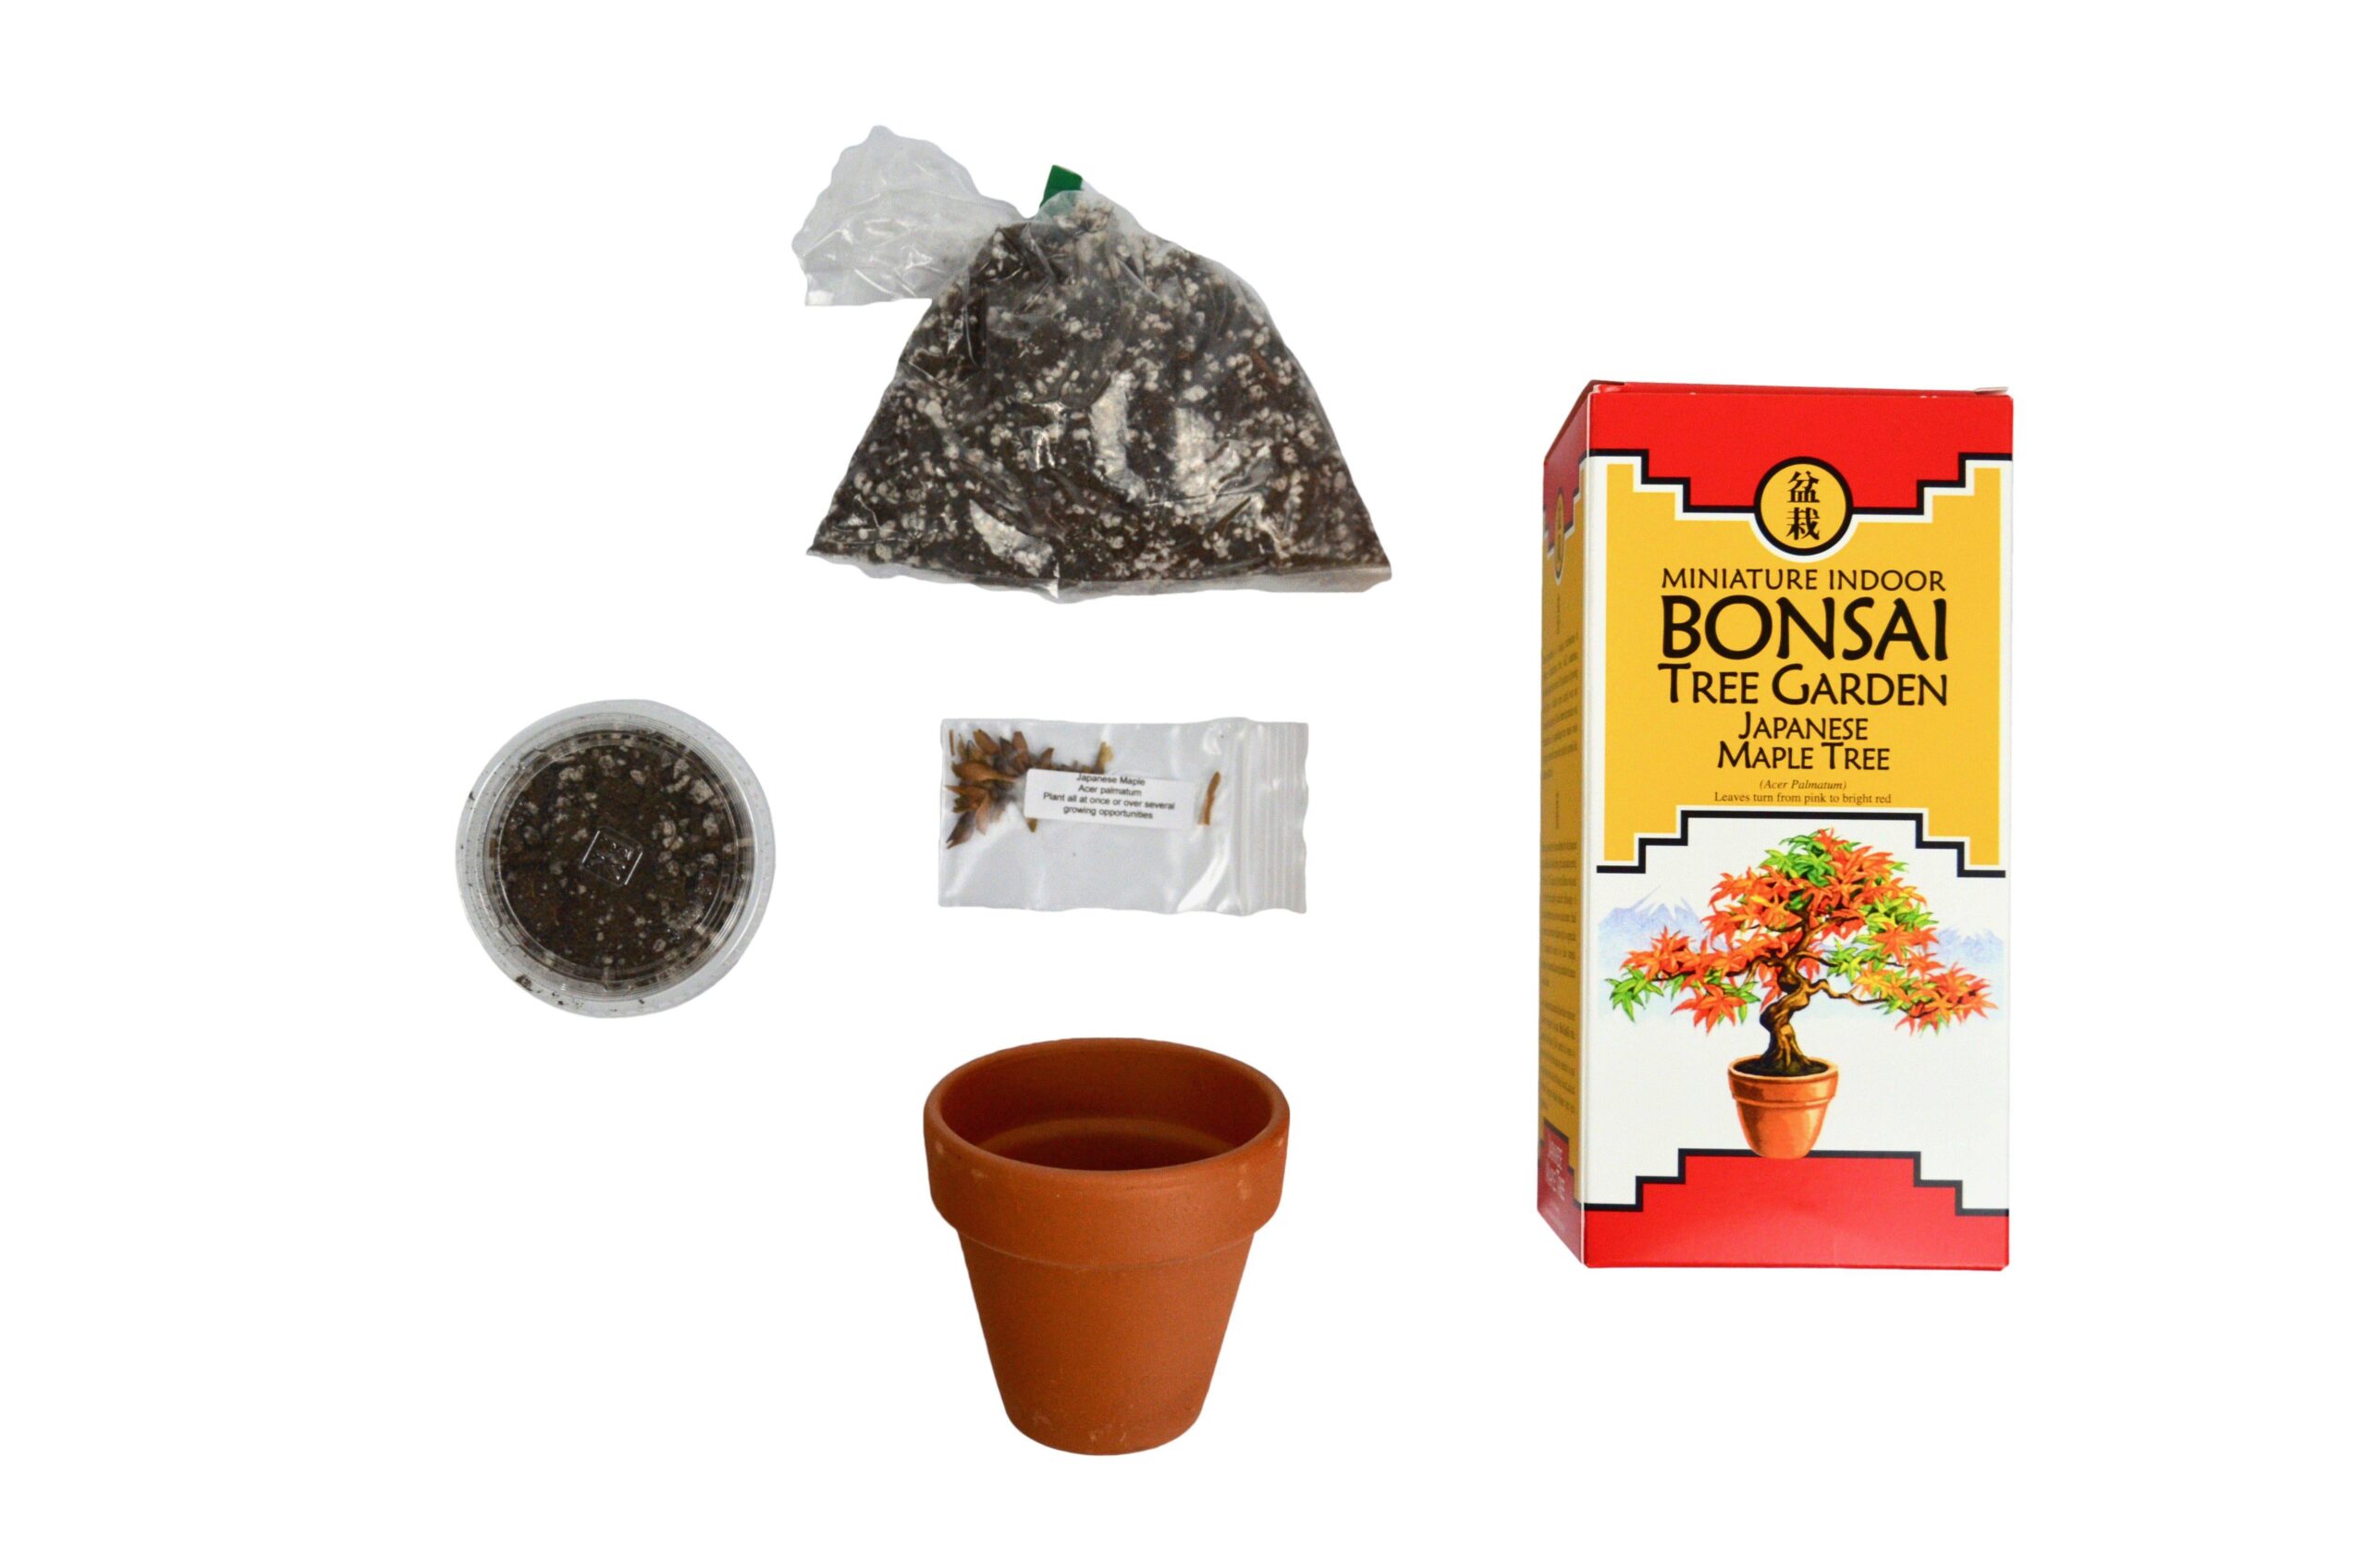 Looking for a top garden center near me? Check out our Bonsai bonsai kit - the best in town! Our plant nursery near me offers the highest quality bonsai kits that are